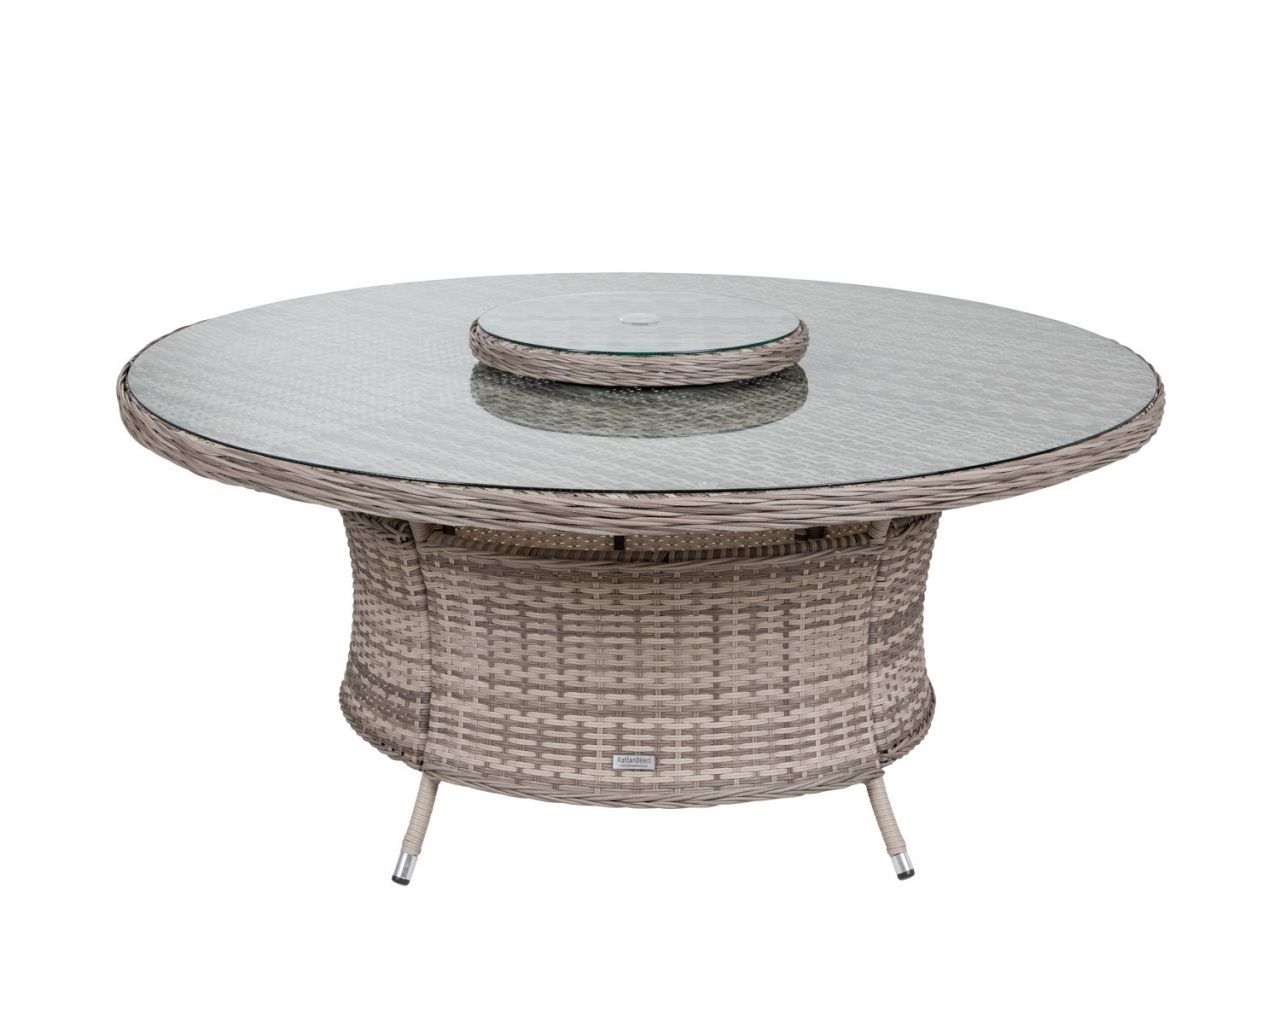 Large Round Rattan Garden Dining Table With Lazy Susan In Grey – Rattan Throughout Distressed Wicker Patio Dining Set (View 8 of 15)